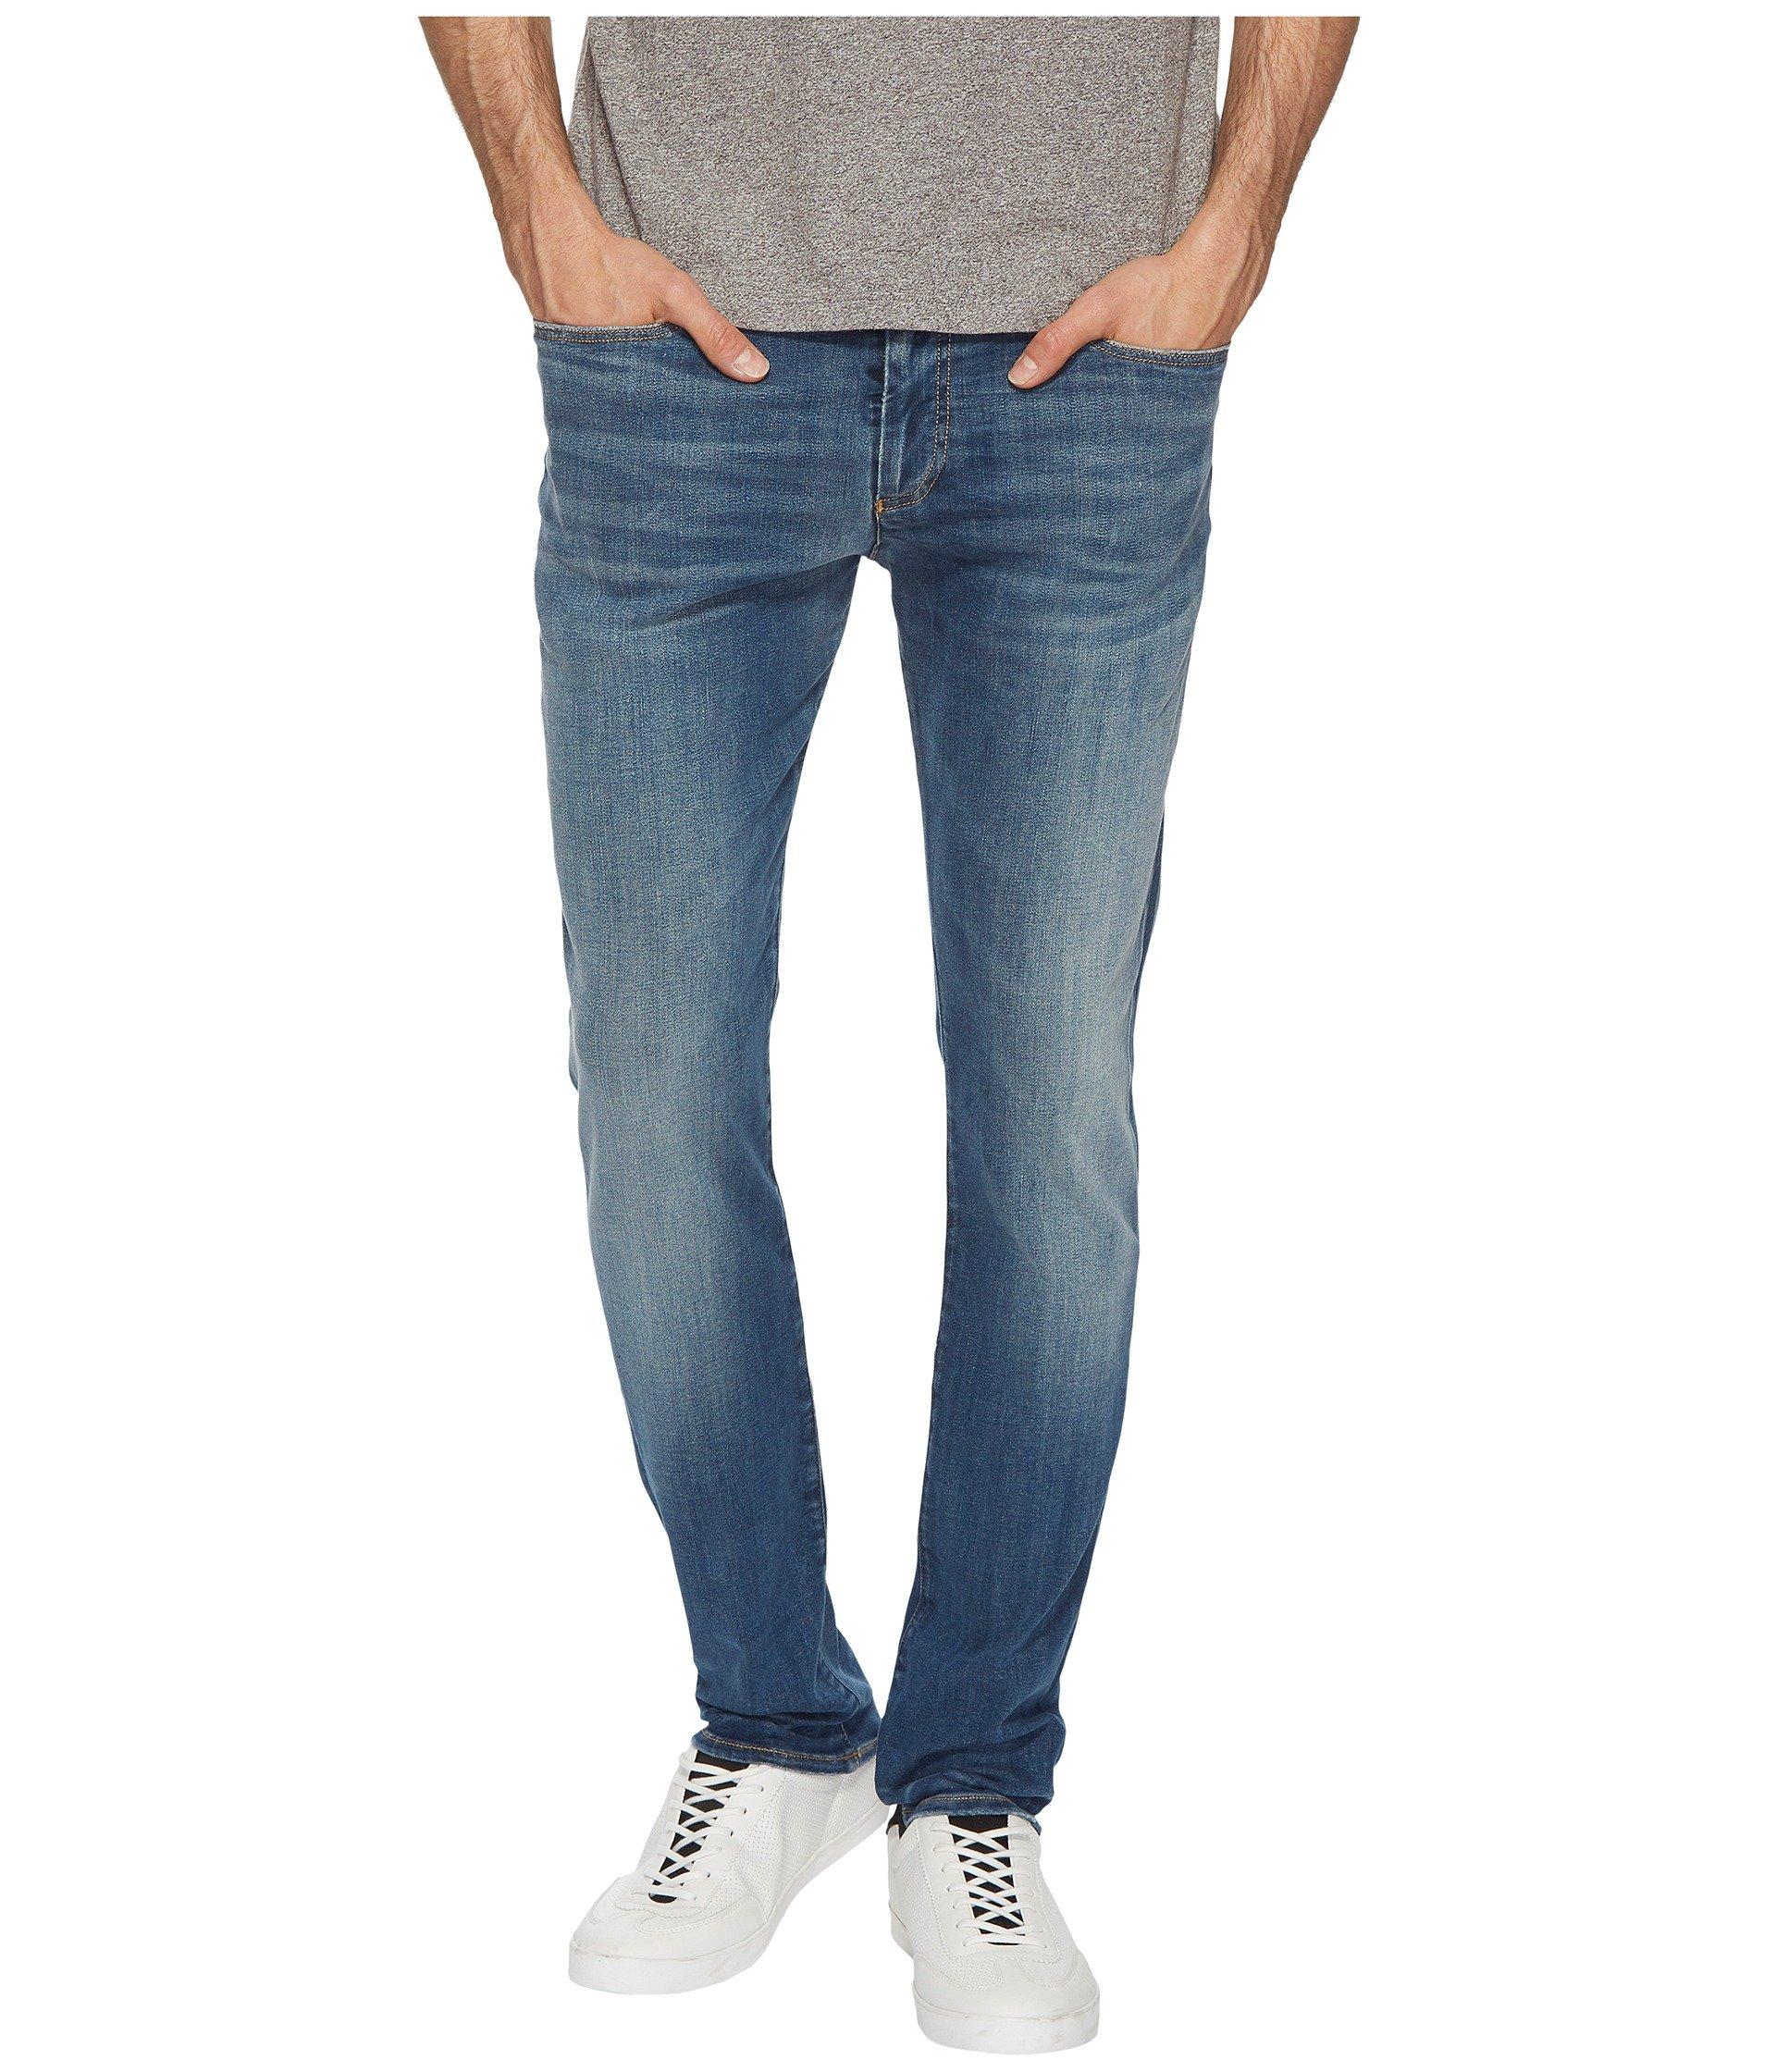 Tommy Hilfiger Simon Skinny Jeans Online, 56% OFF |  www.angloamericancentre.it